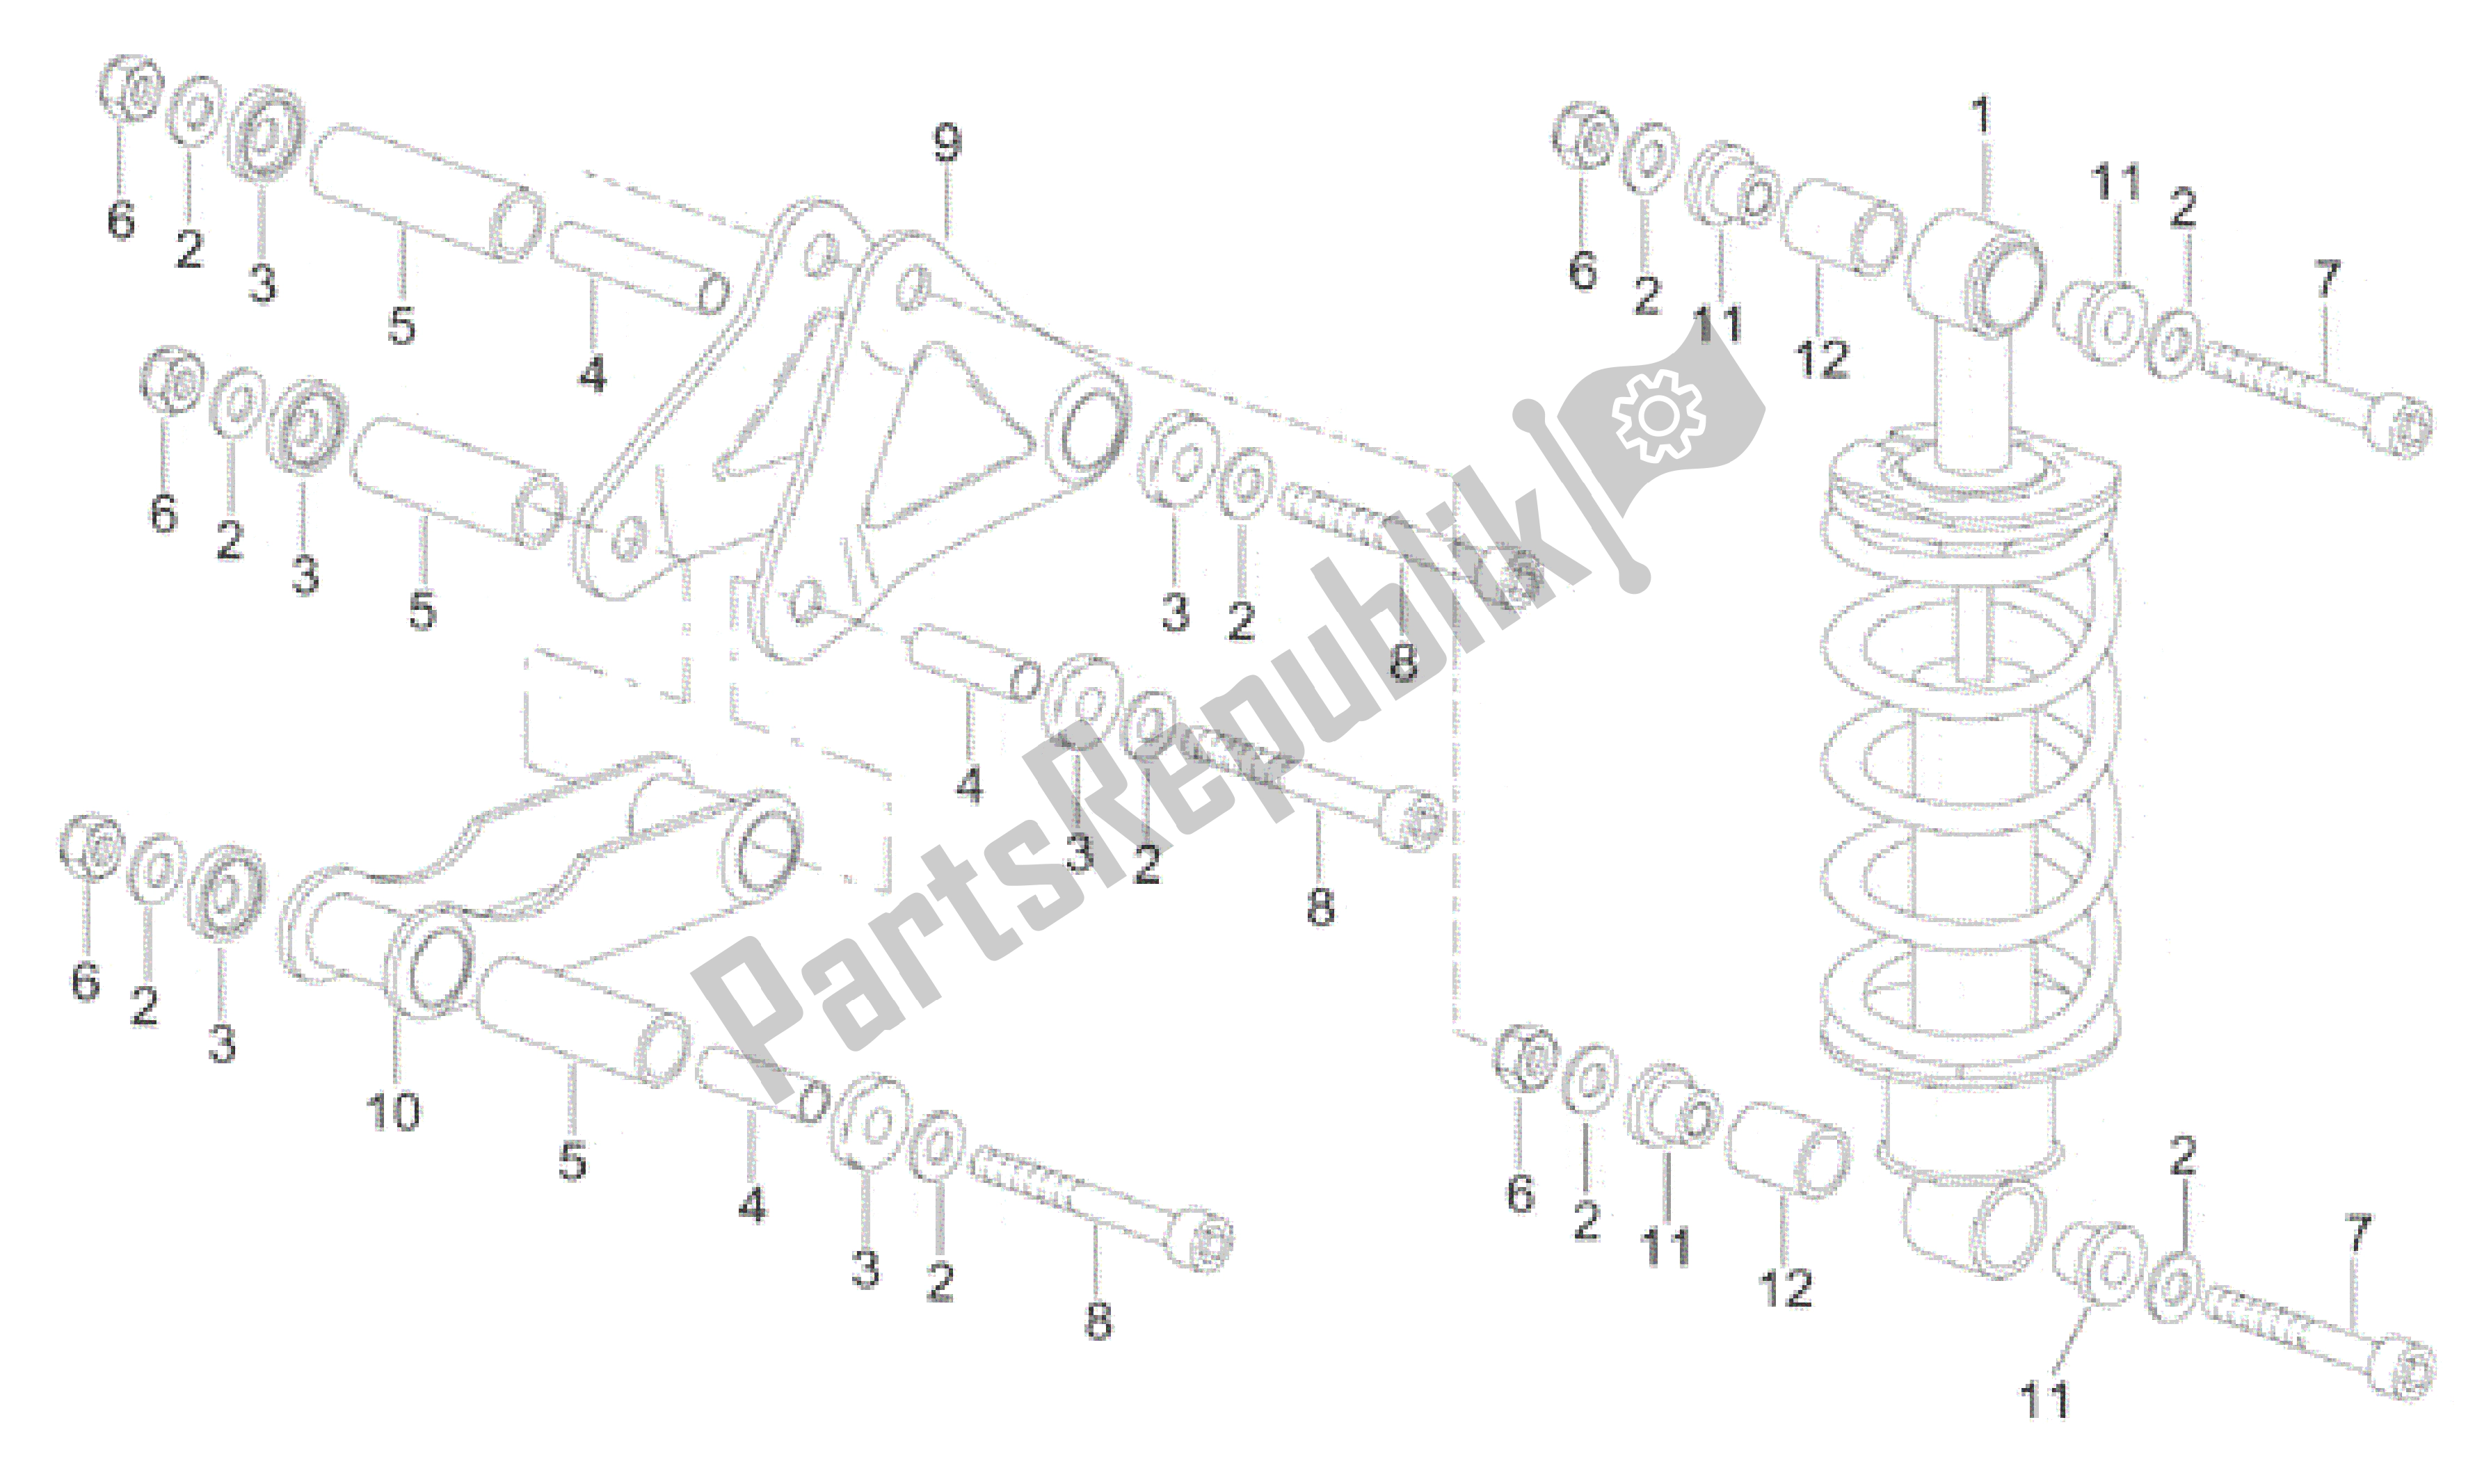 All parts for the Rear Shock Absorber of the Aprilia RS 50 1996 - 1998